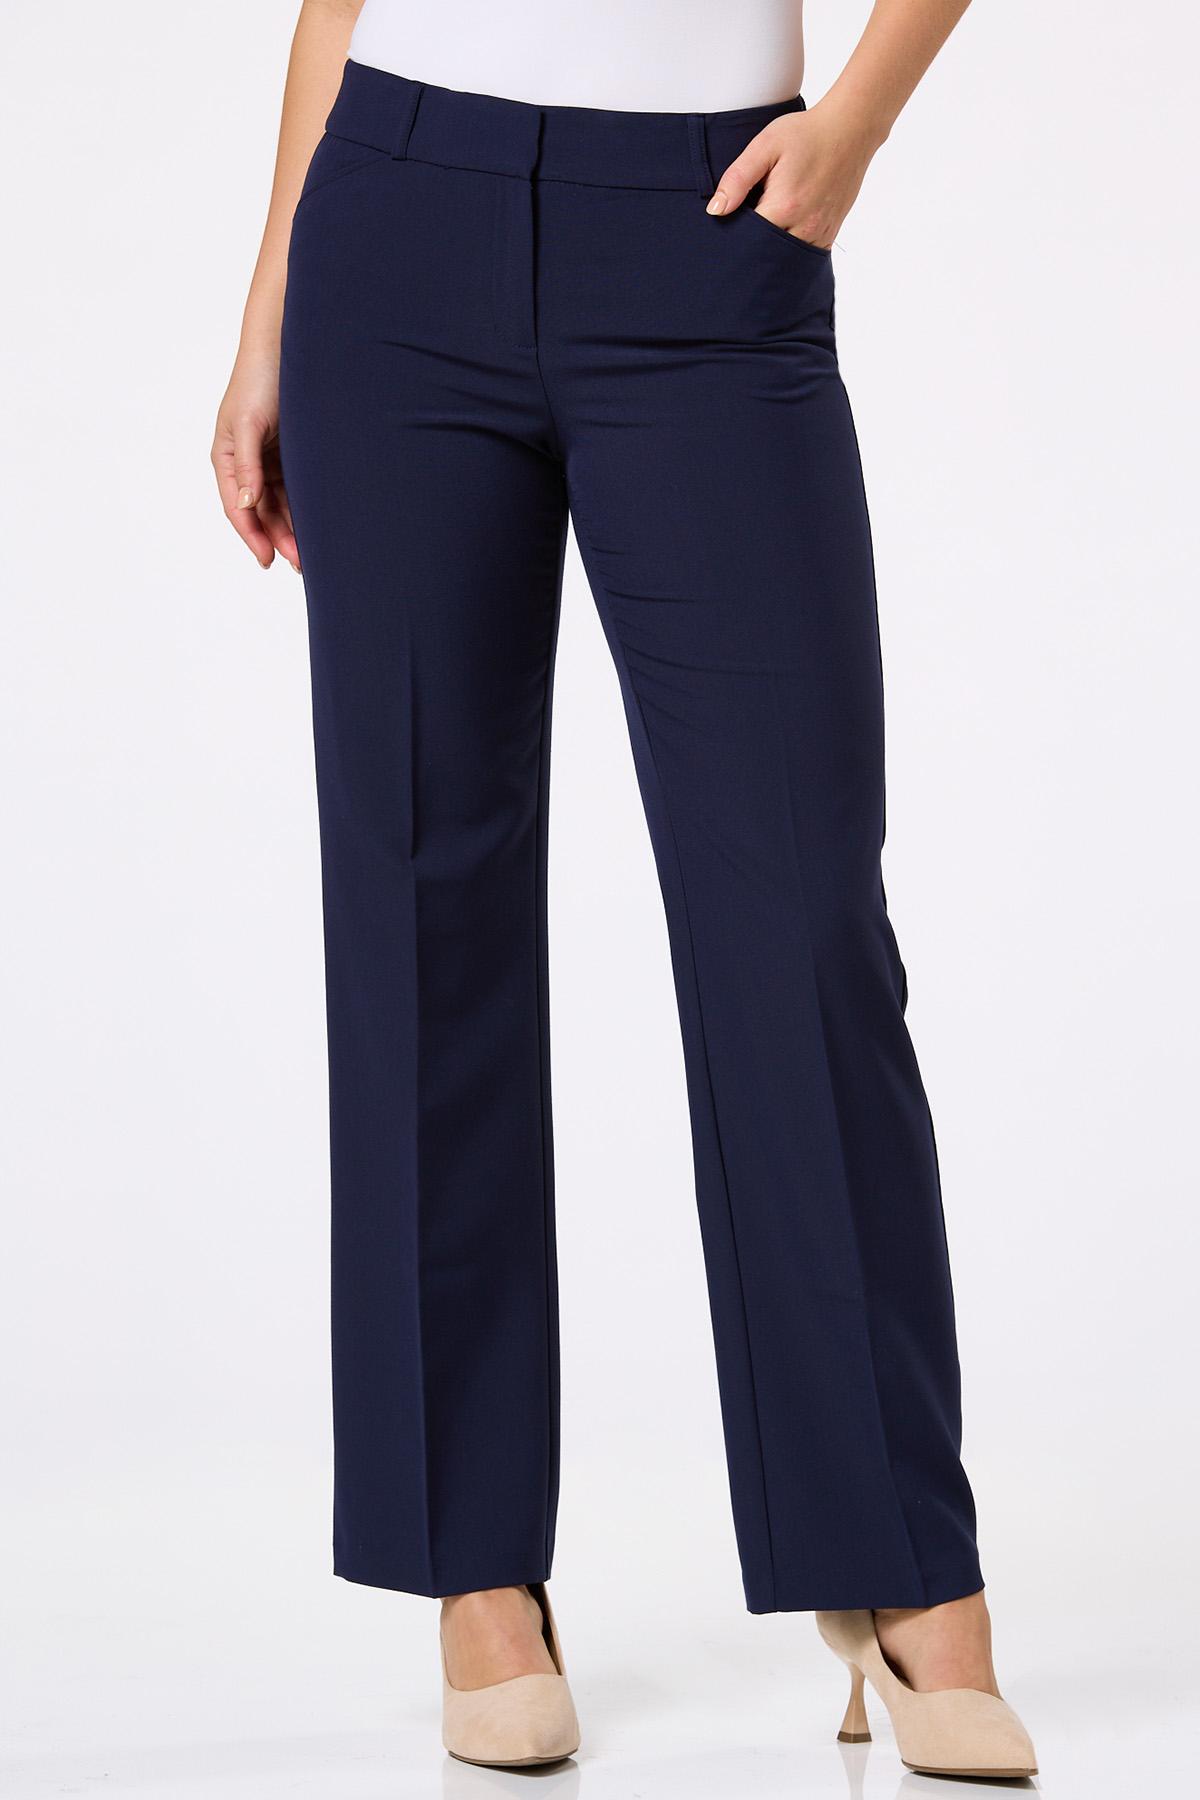 Cato Fashions  Cato Navy Trouser Pants